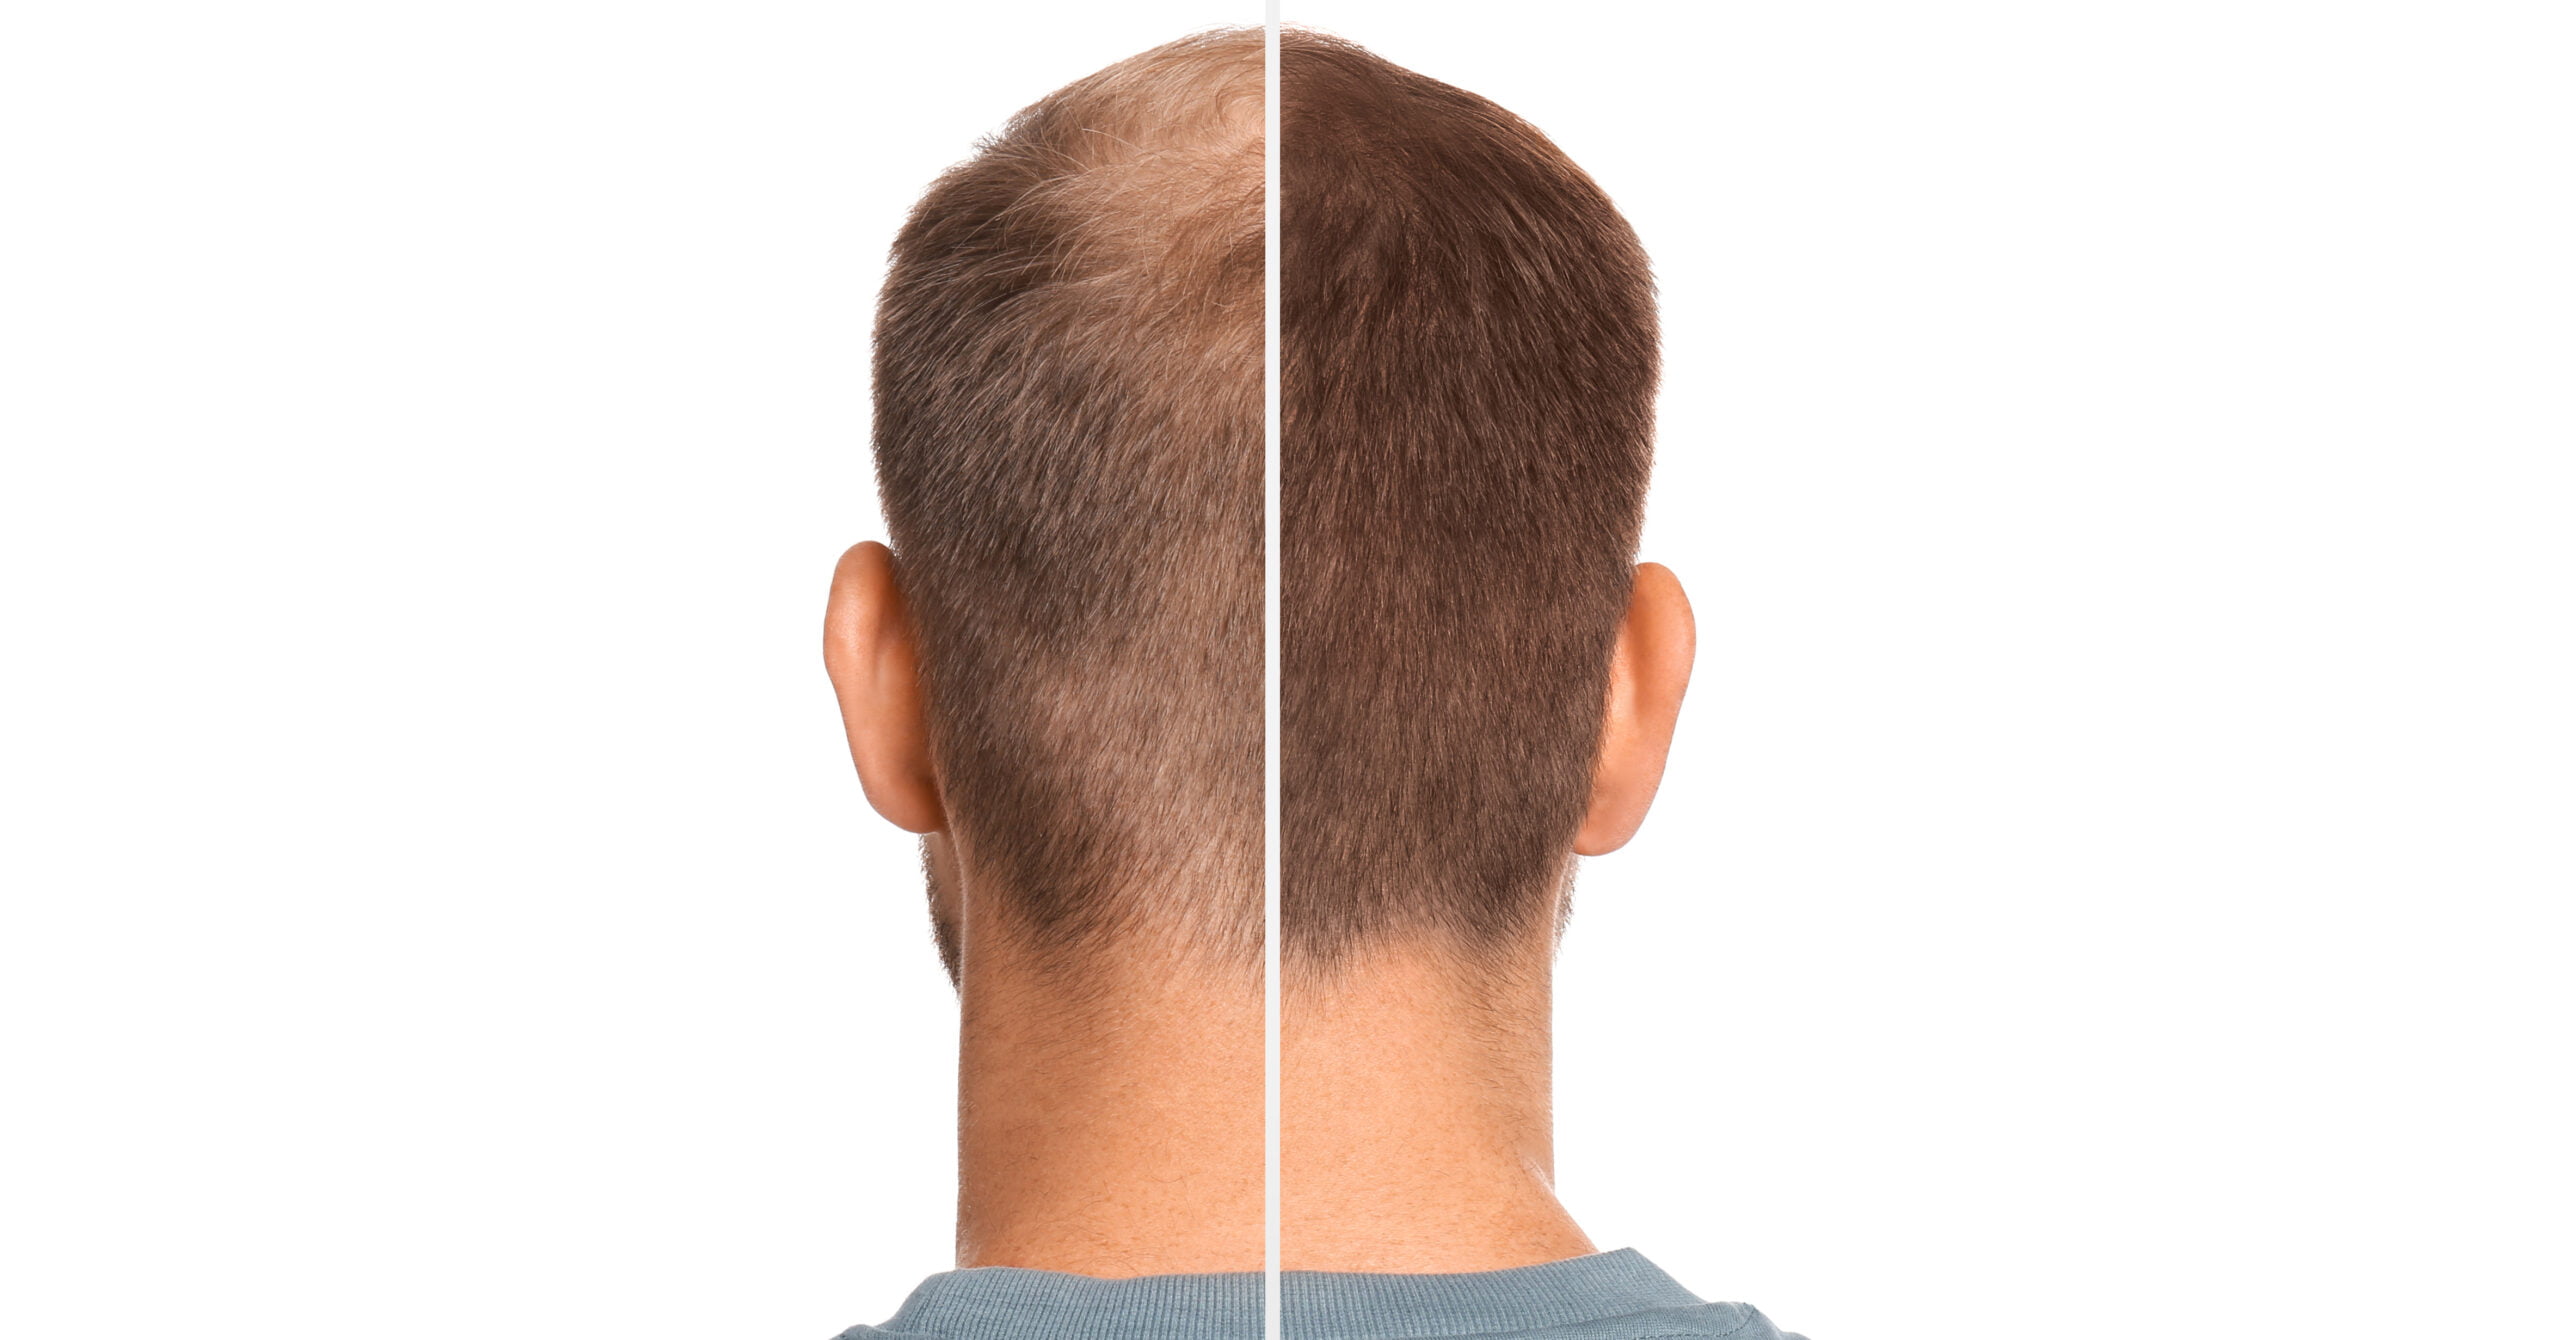 UNVEILING 10 INTRIGUING FACTS ABOUT HAIR TRANSPLANTS THAT WILL SURPRISE YOU